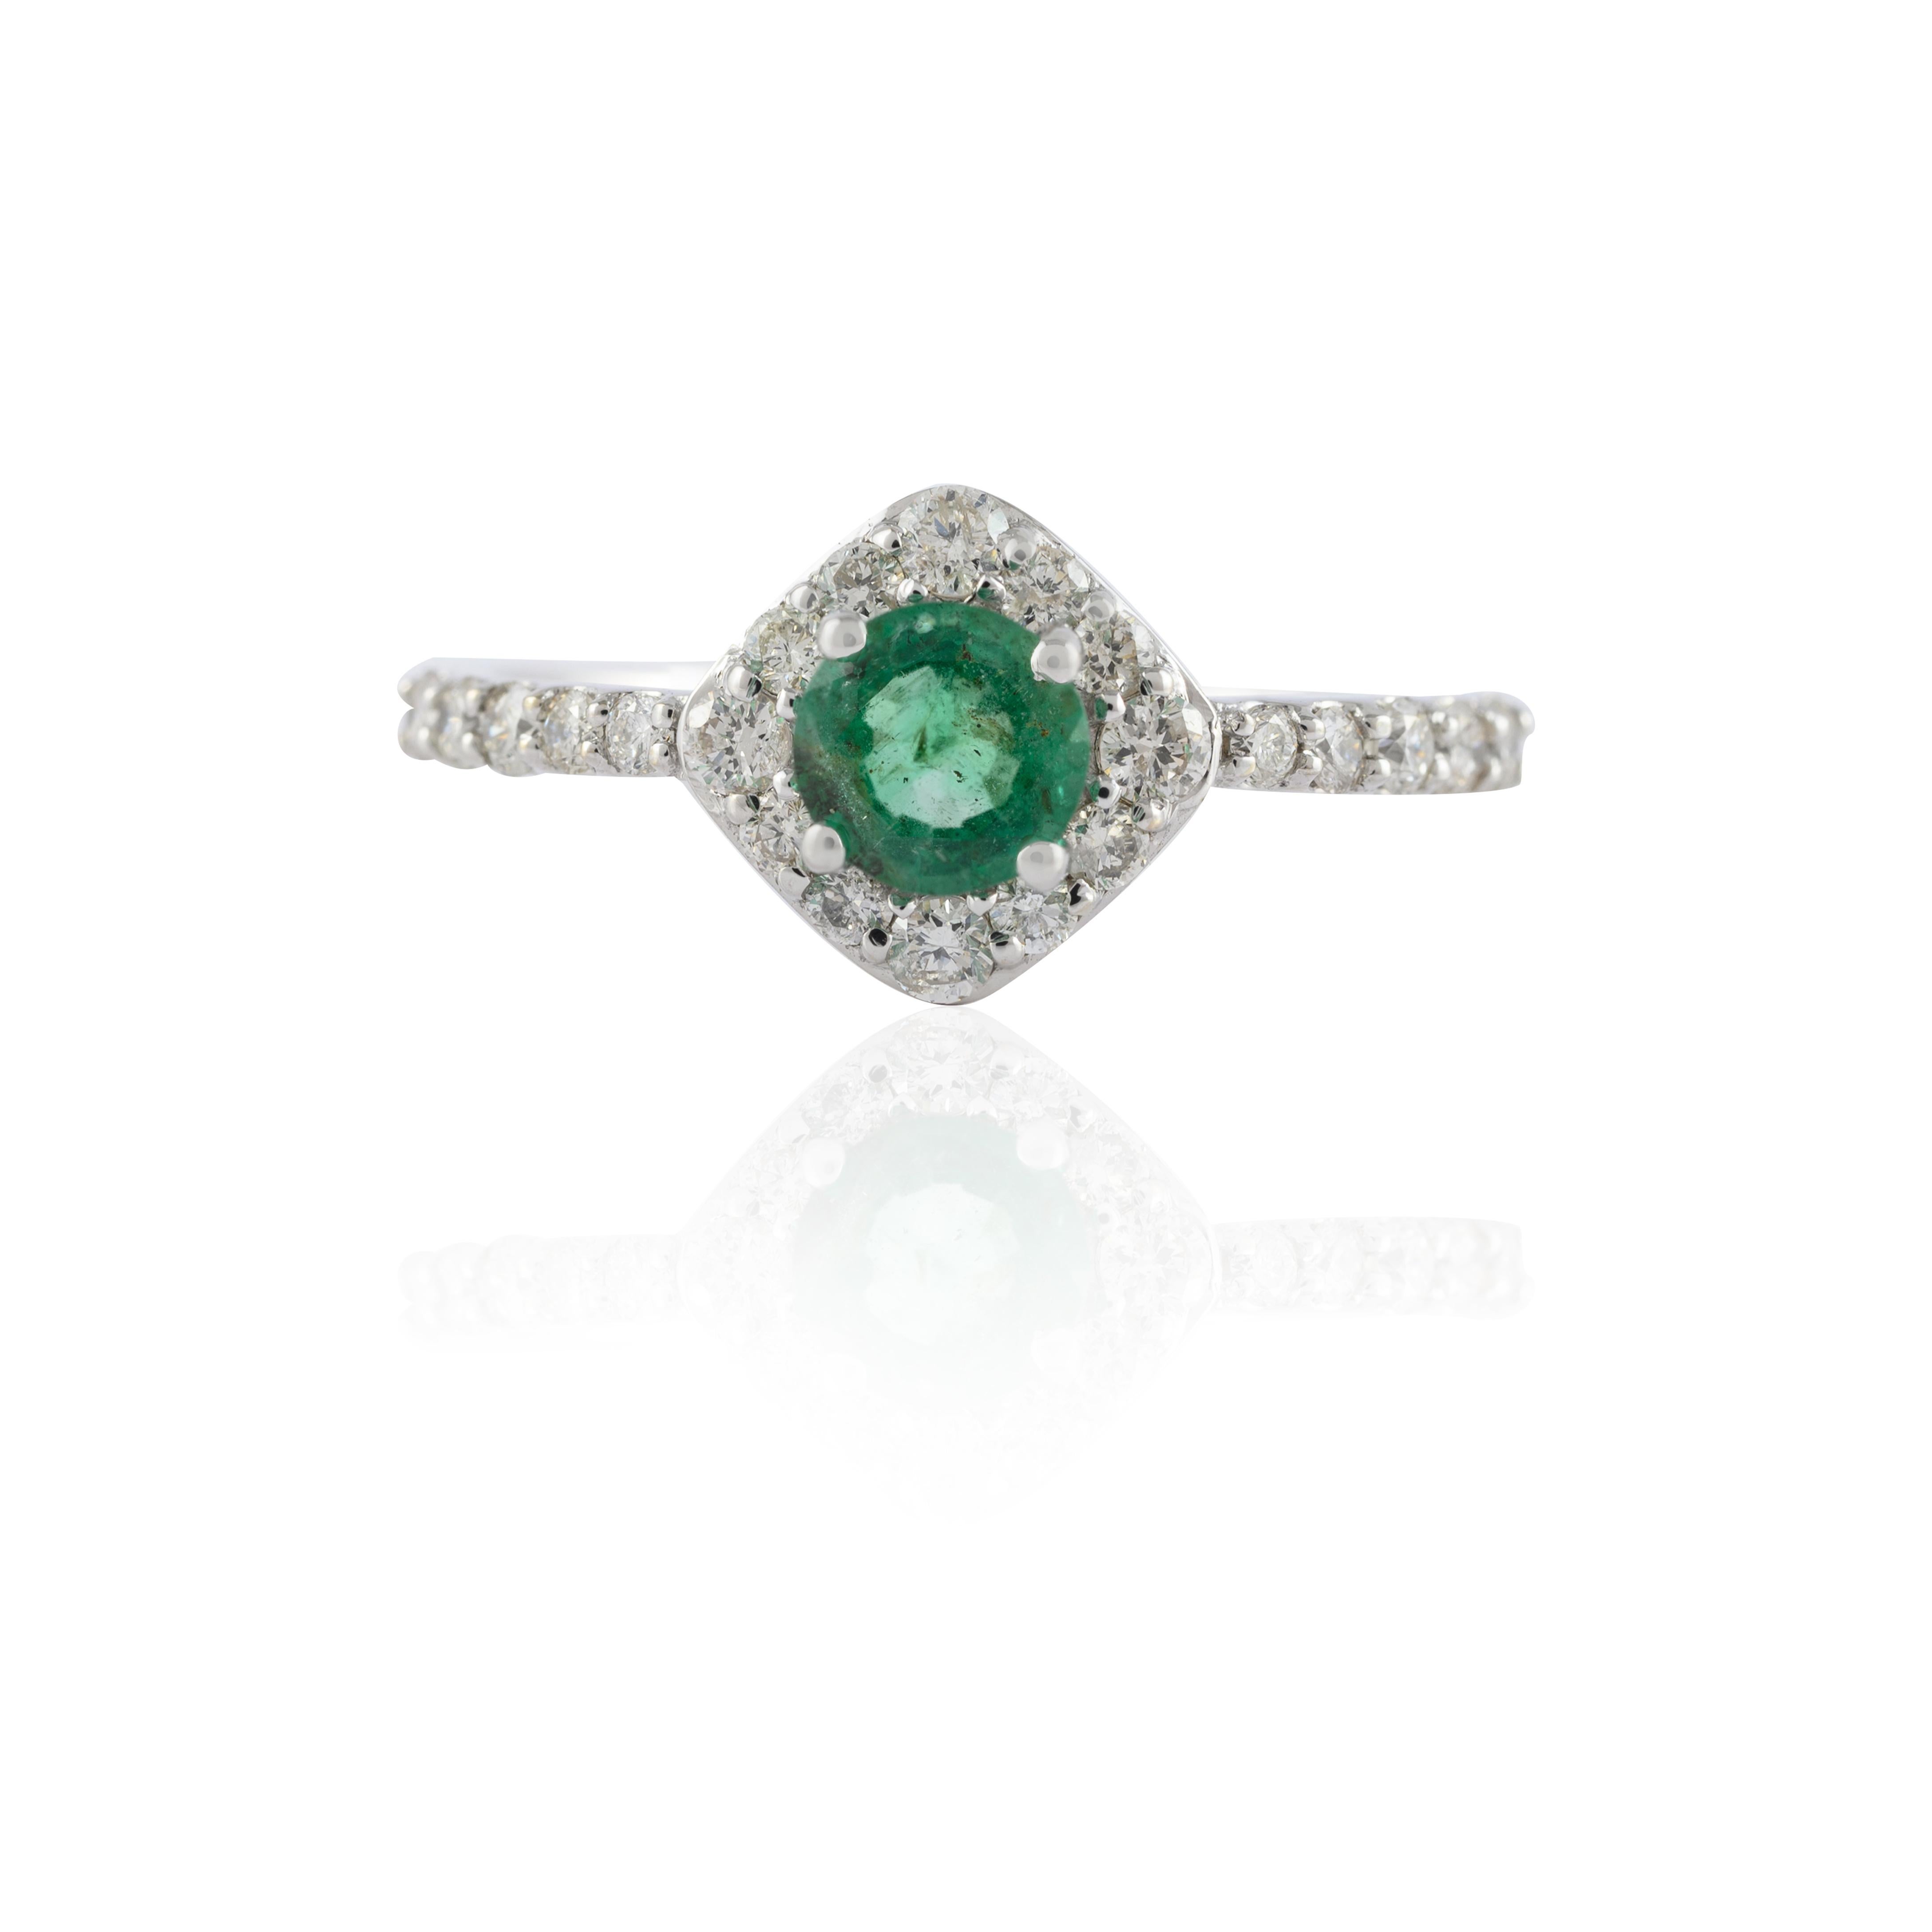 For Sale:  Dainty Halo Diamond Emerald Ring Handcrafted in 14k Solid White Gold 2